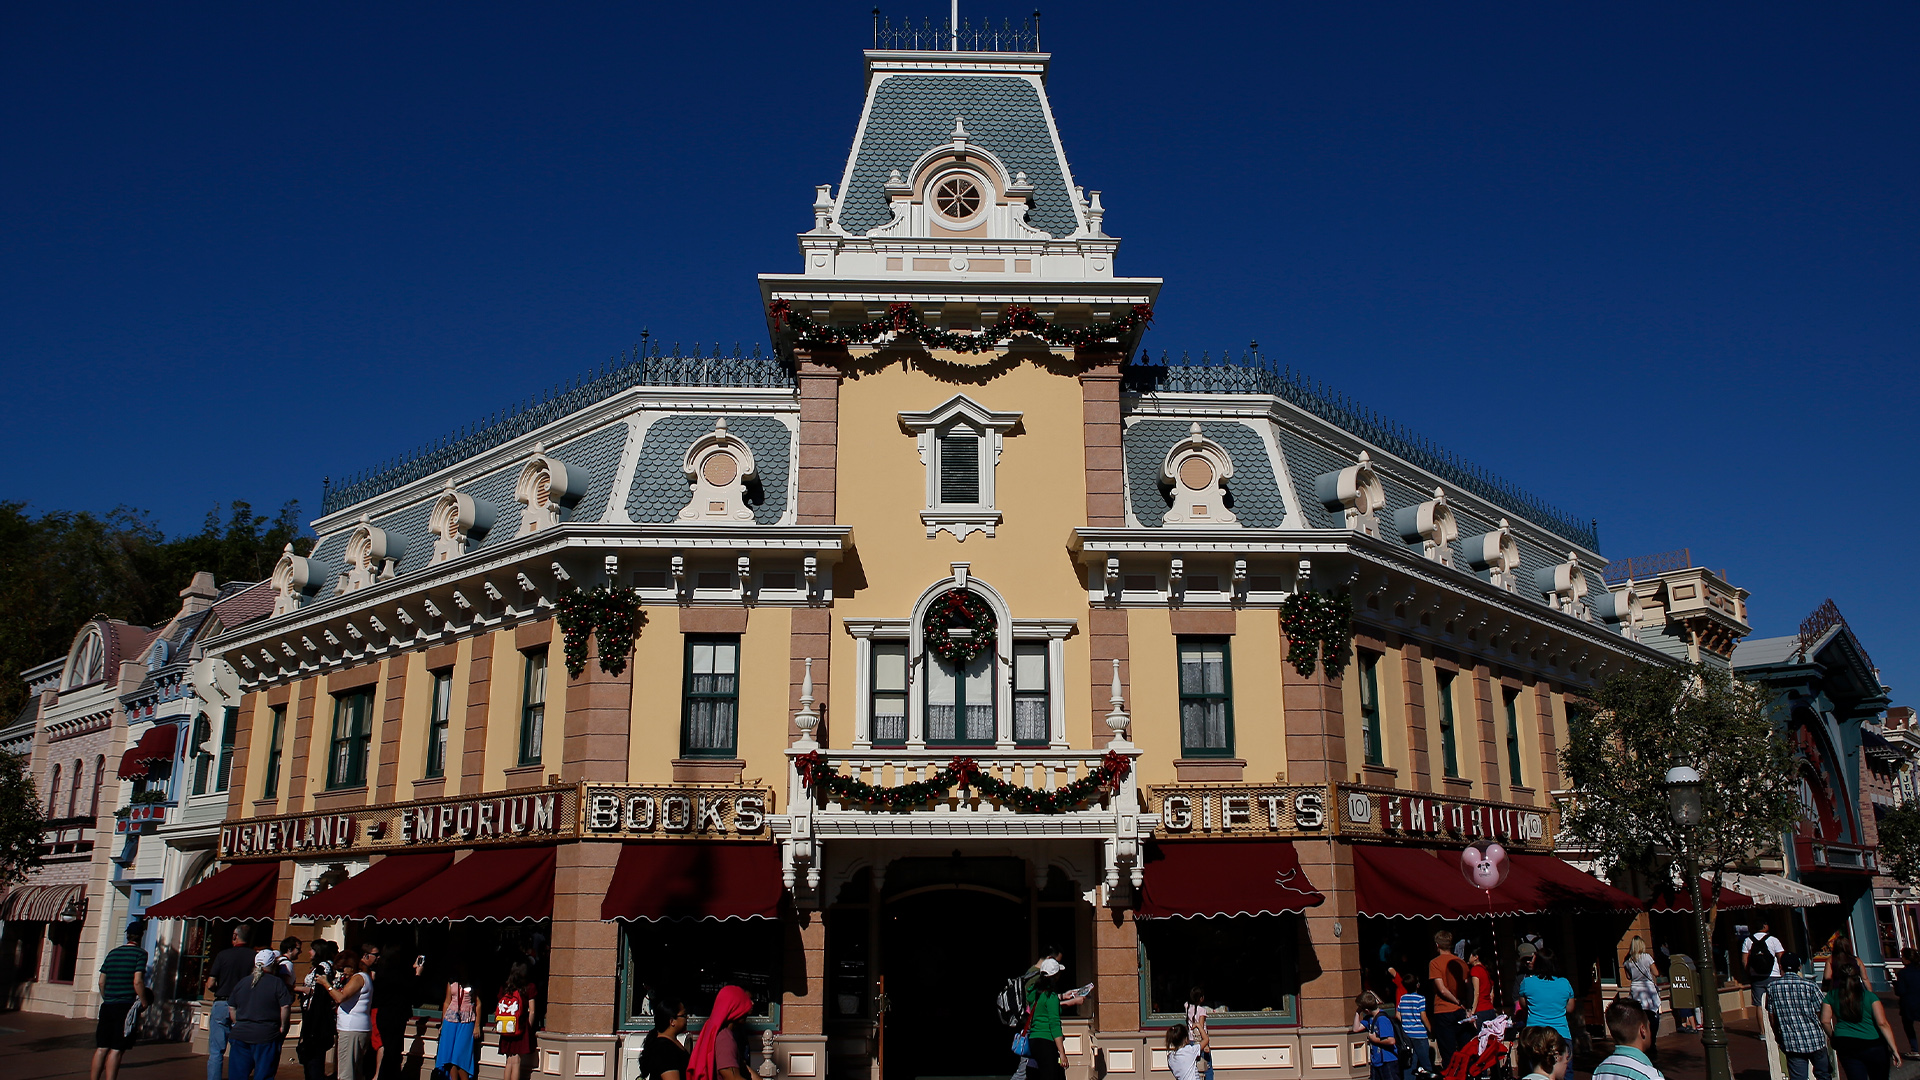 “Uncover the Colorado Town That Inspired Disney’s Main Street USA – Discover Which Details Were Direct Copies!” #Colorado #MainStreetUSA #Disney #Inspiration #Copywriting